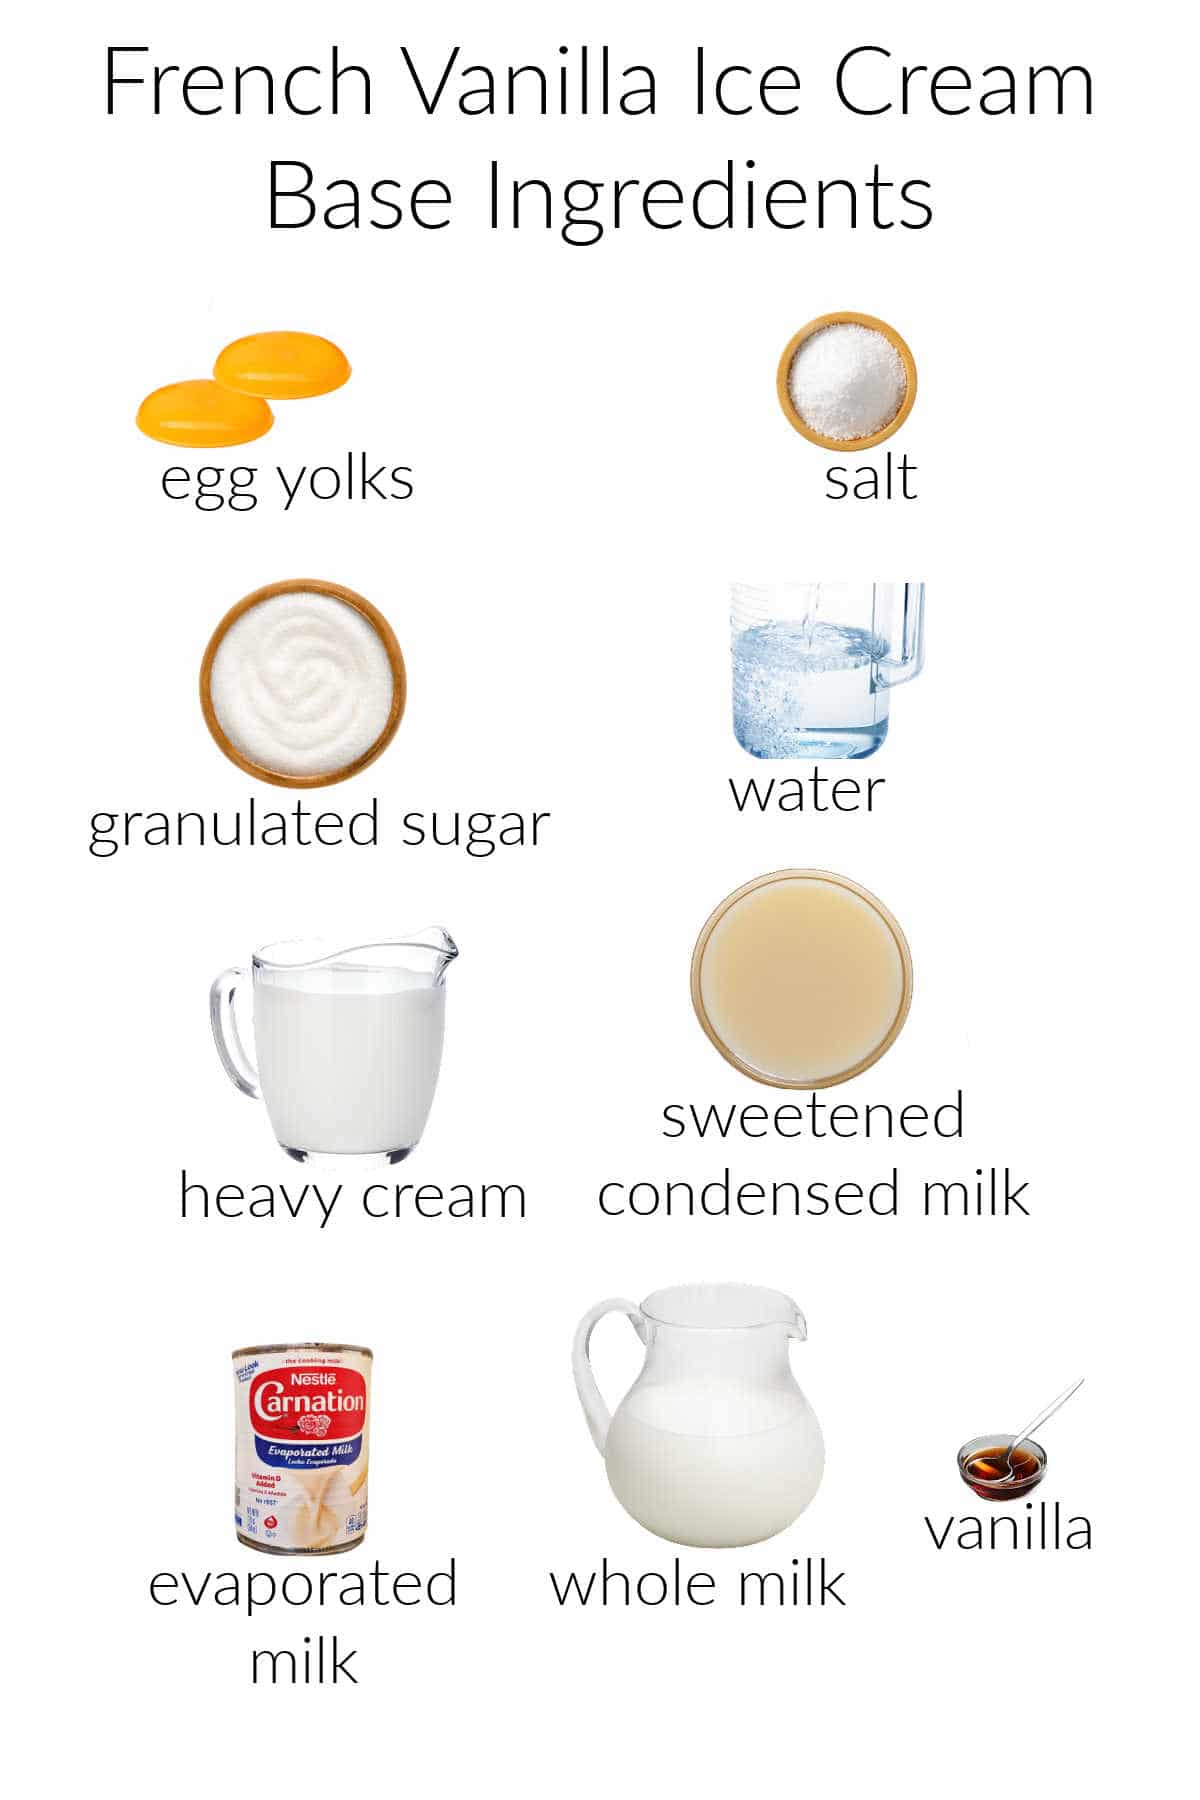 A collage of the ingredients for making vanilla ice cream base: egg yolks, salt, sugar, water, heavy cream, sweetened condensed milk, evaporated milk, whole milk, and vanilla.